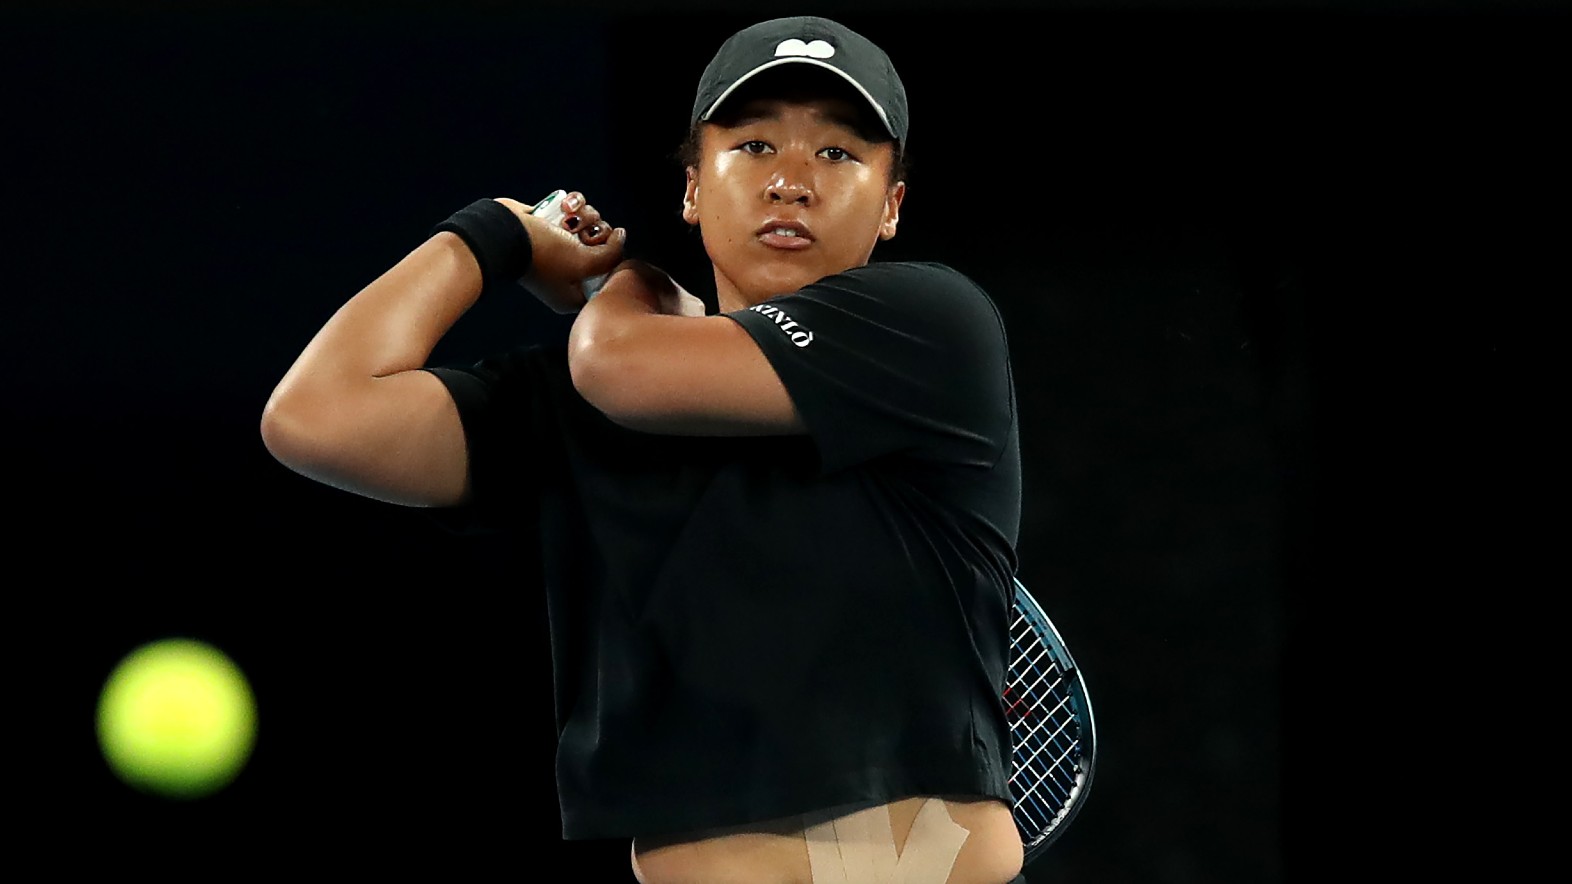 Naomi Osaka’s change in attitude sets her up for a big tournament, says Todd Woodbridge